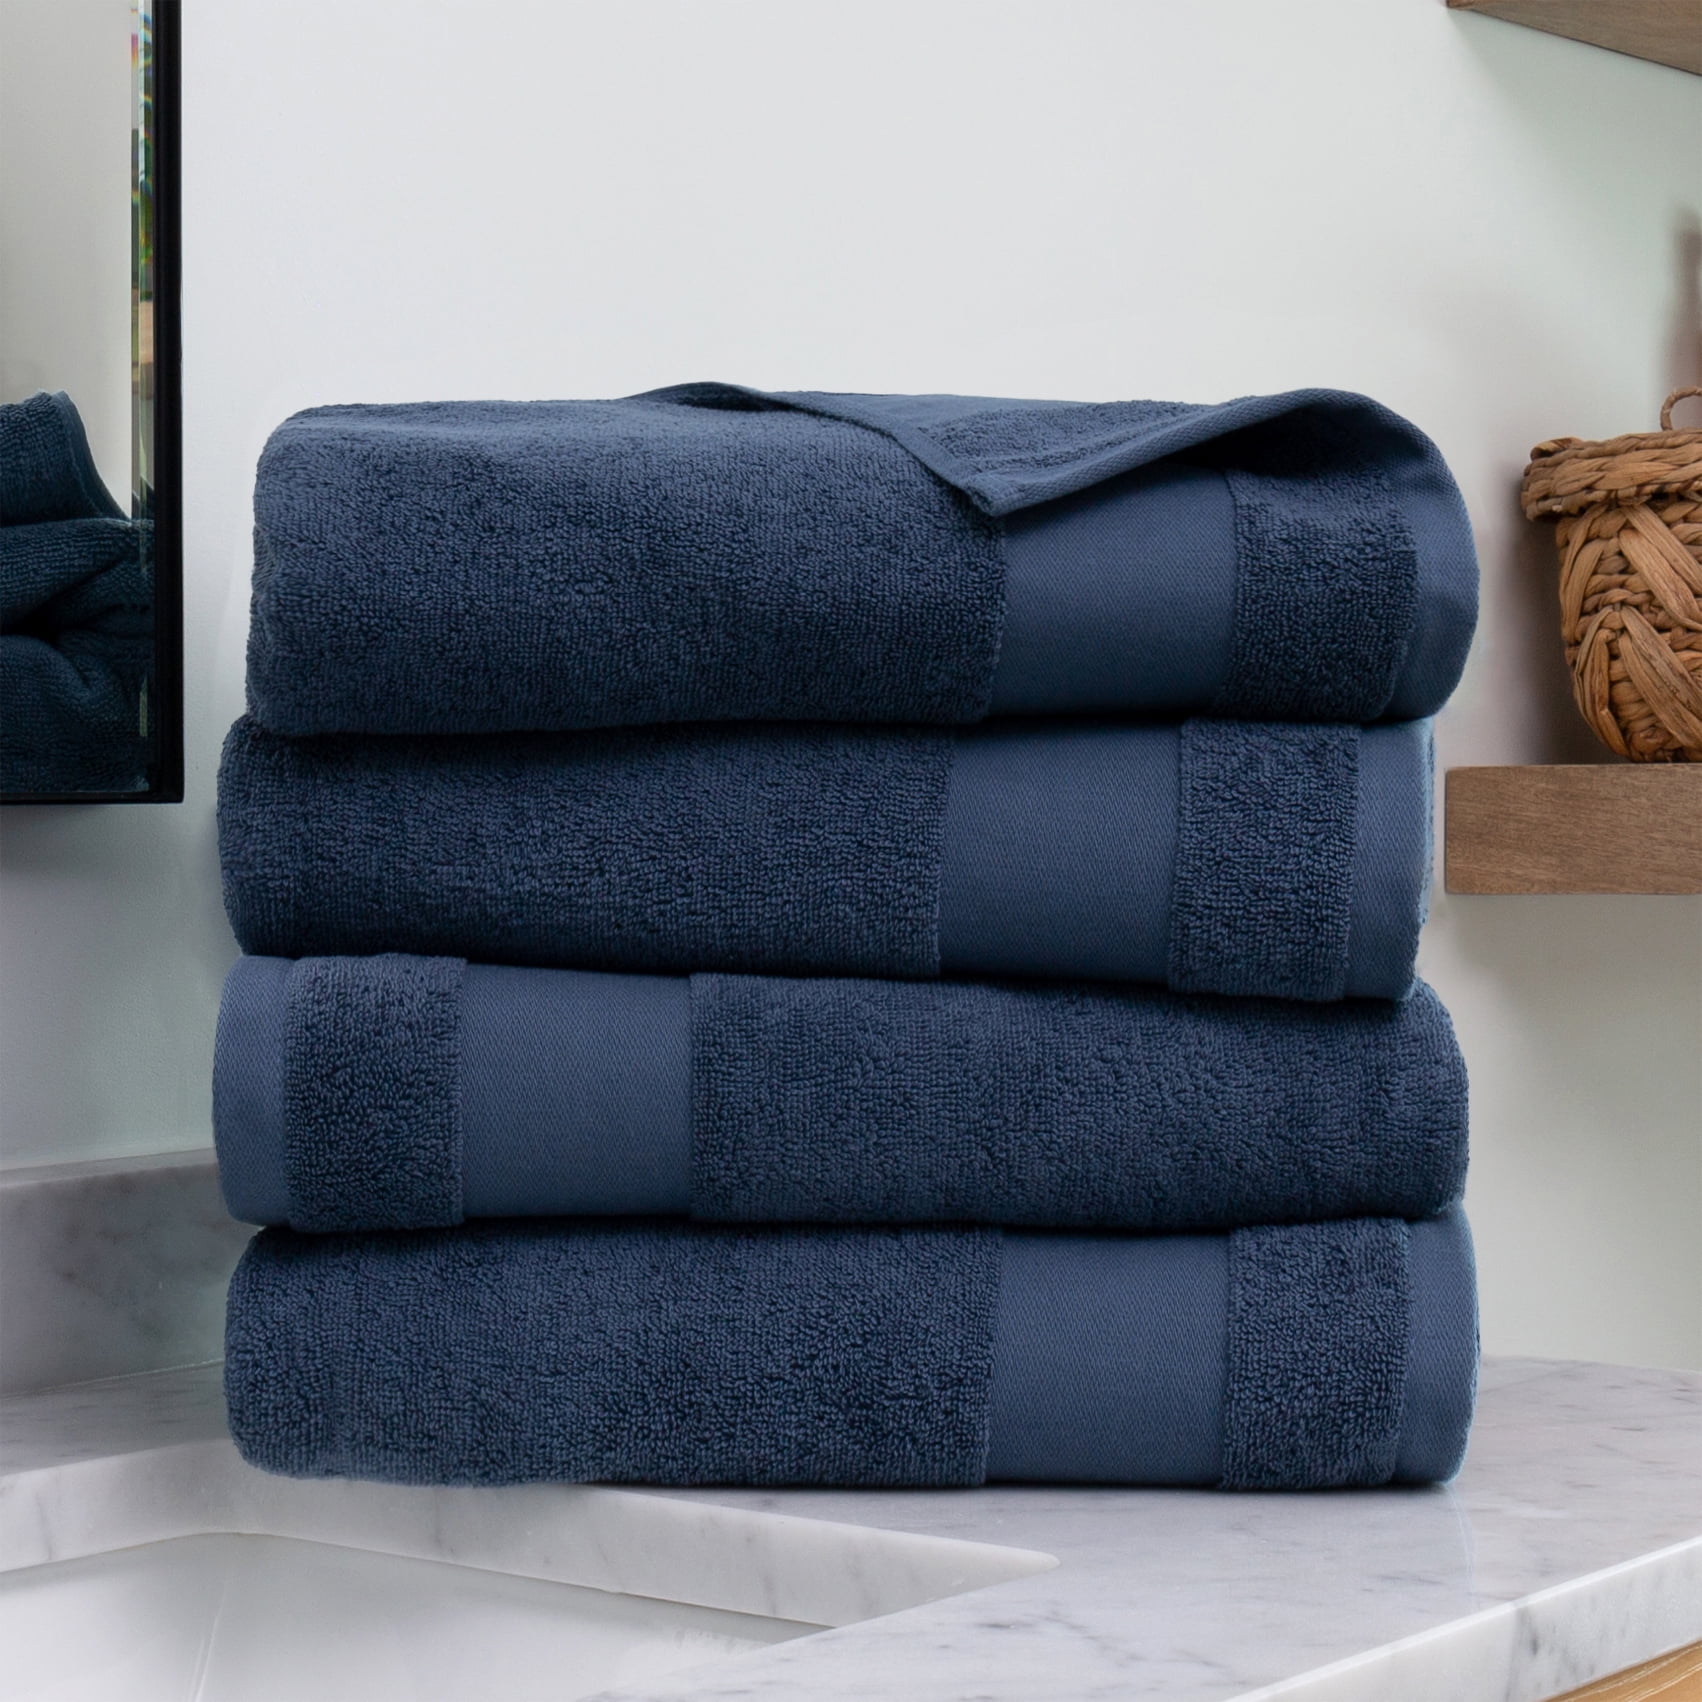 Bath Towel Set  Noble House Home & Gift Collection